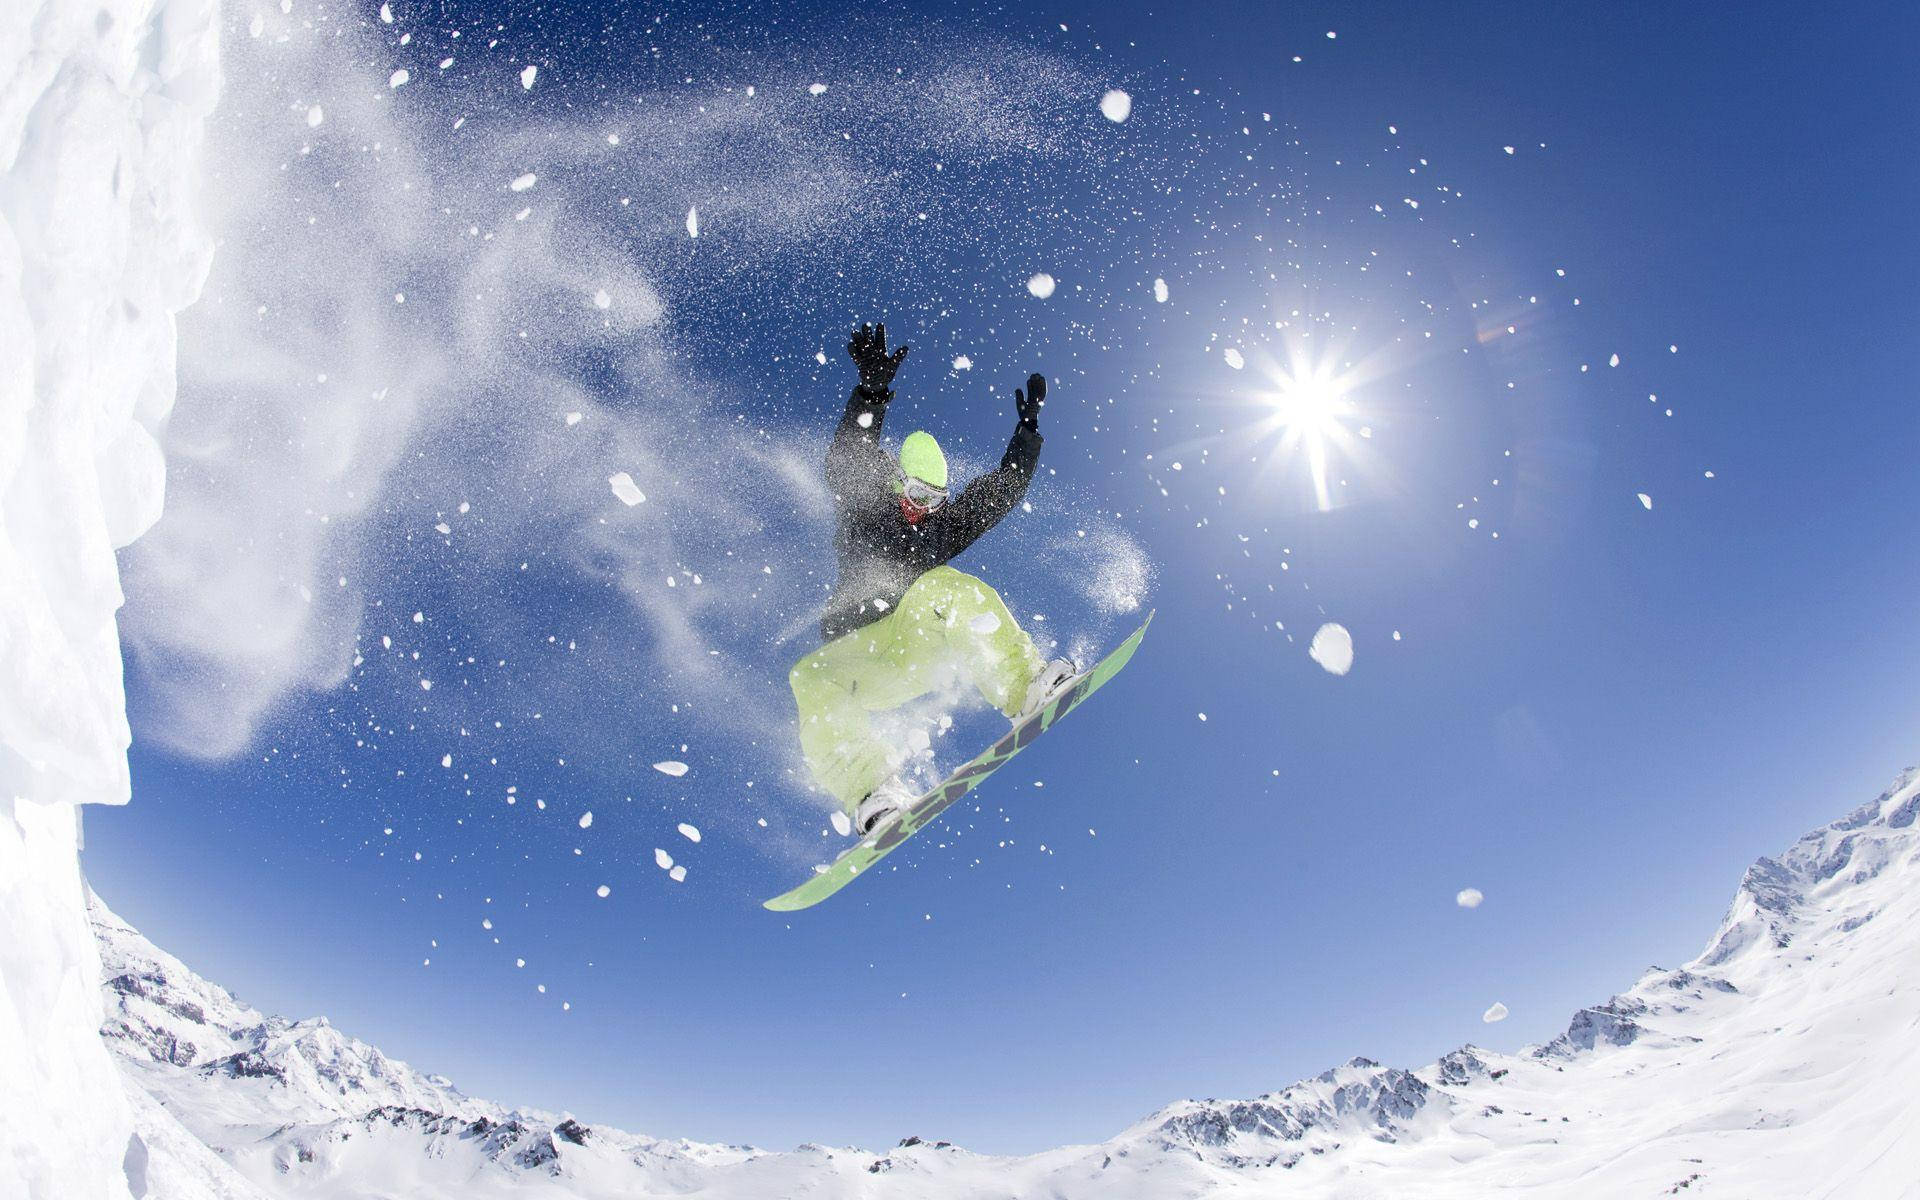 Man With Snowboard Posing Mid-trick Picture